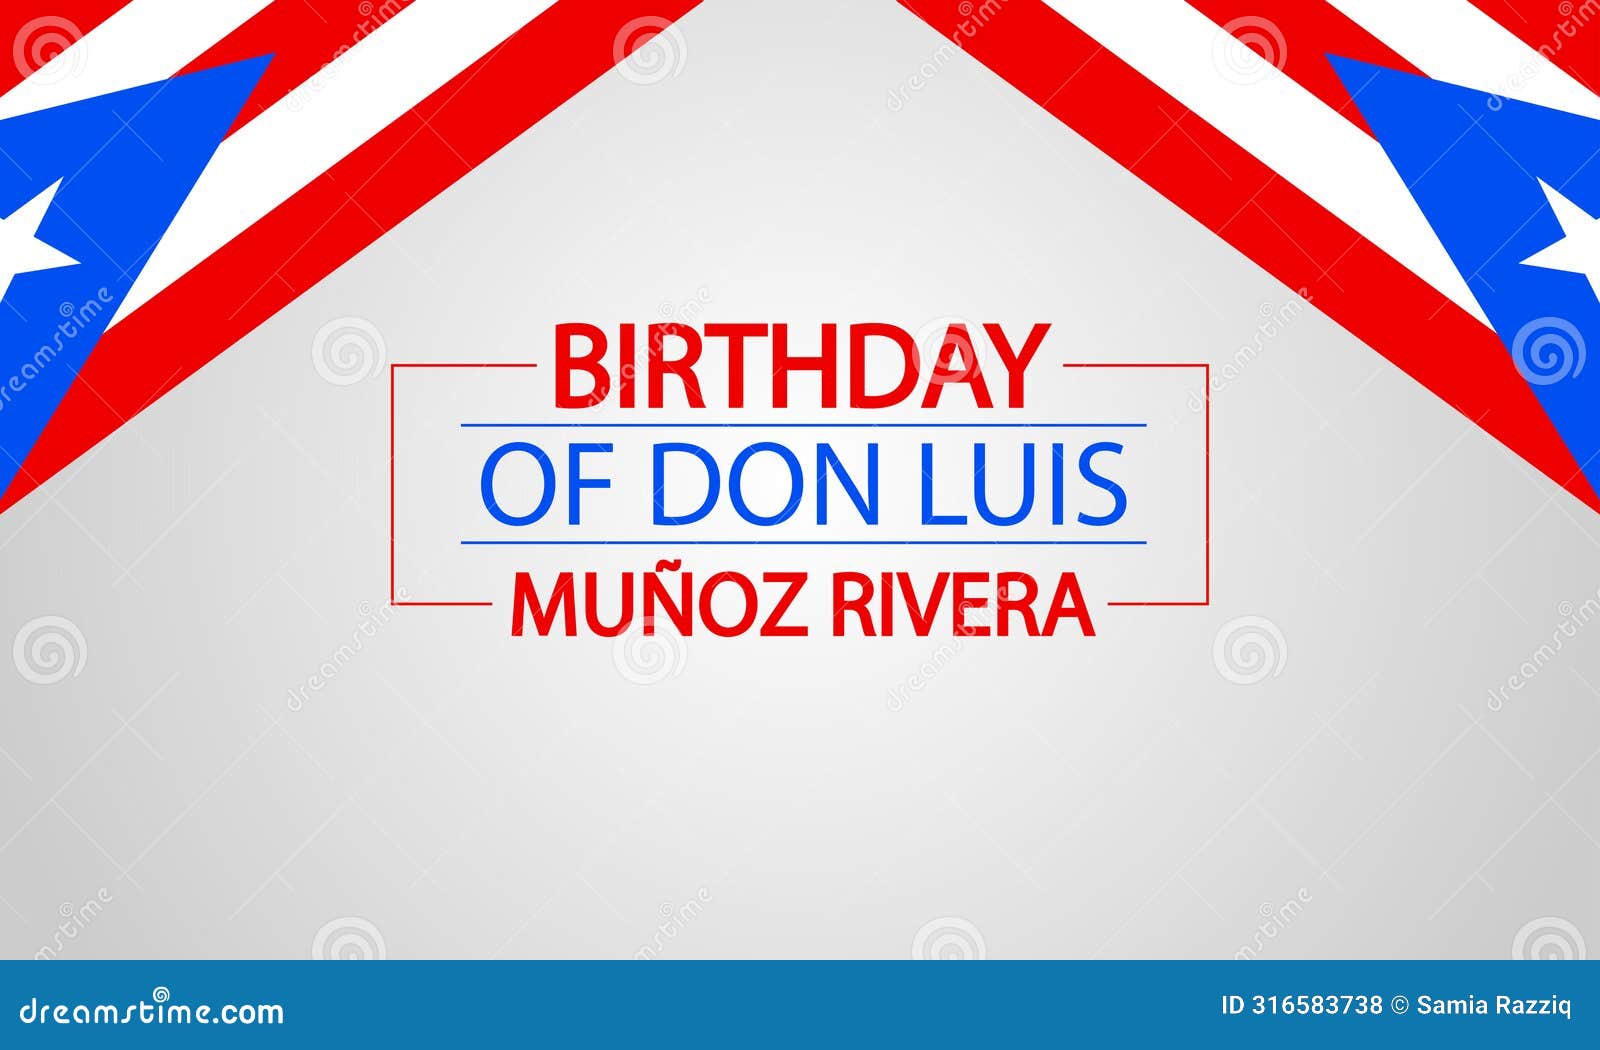 creating a visual journey for don luis munoz riveras birthday text 